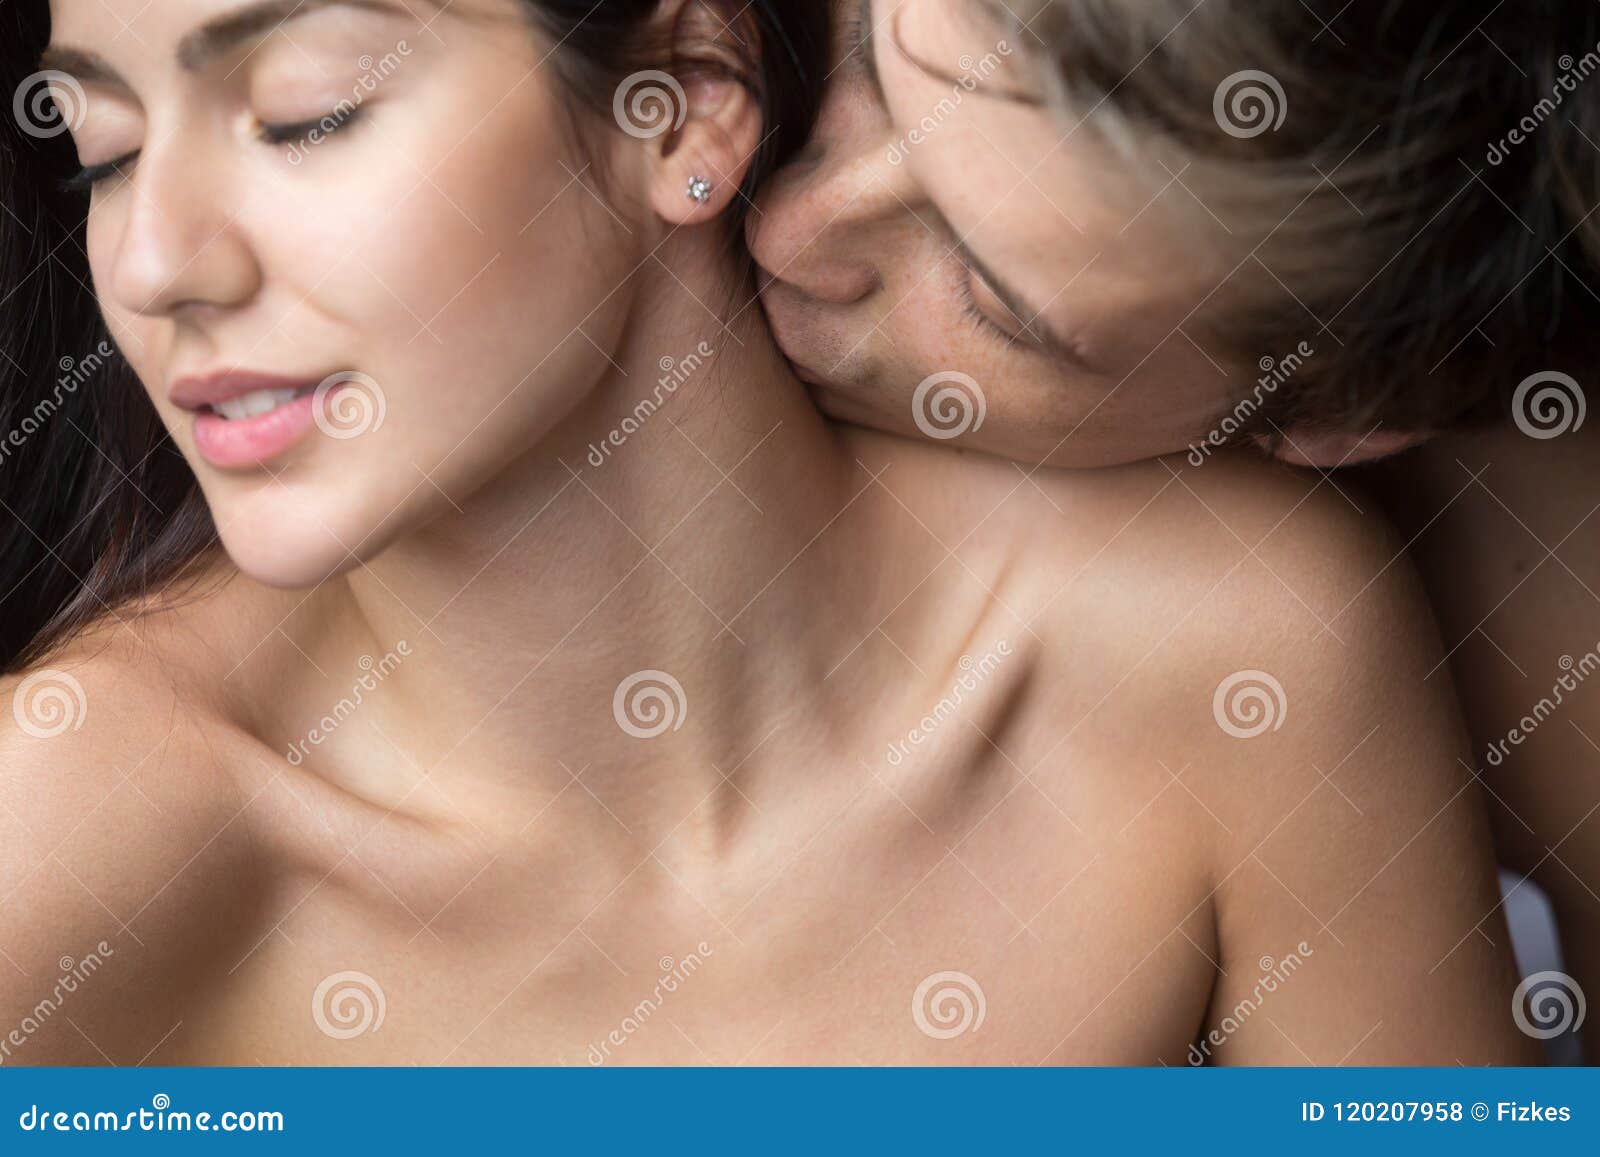 Passionate Man Kissing Woman on Neck Enjoying Foreplay Stock Photo picture